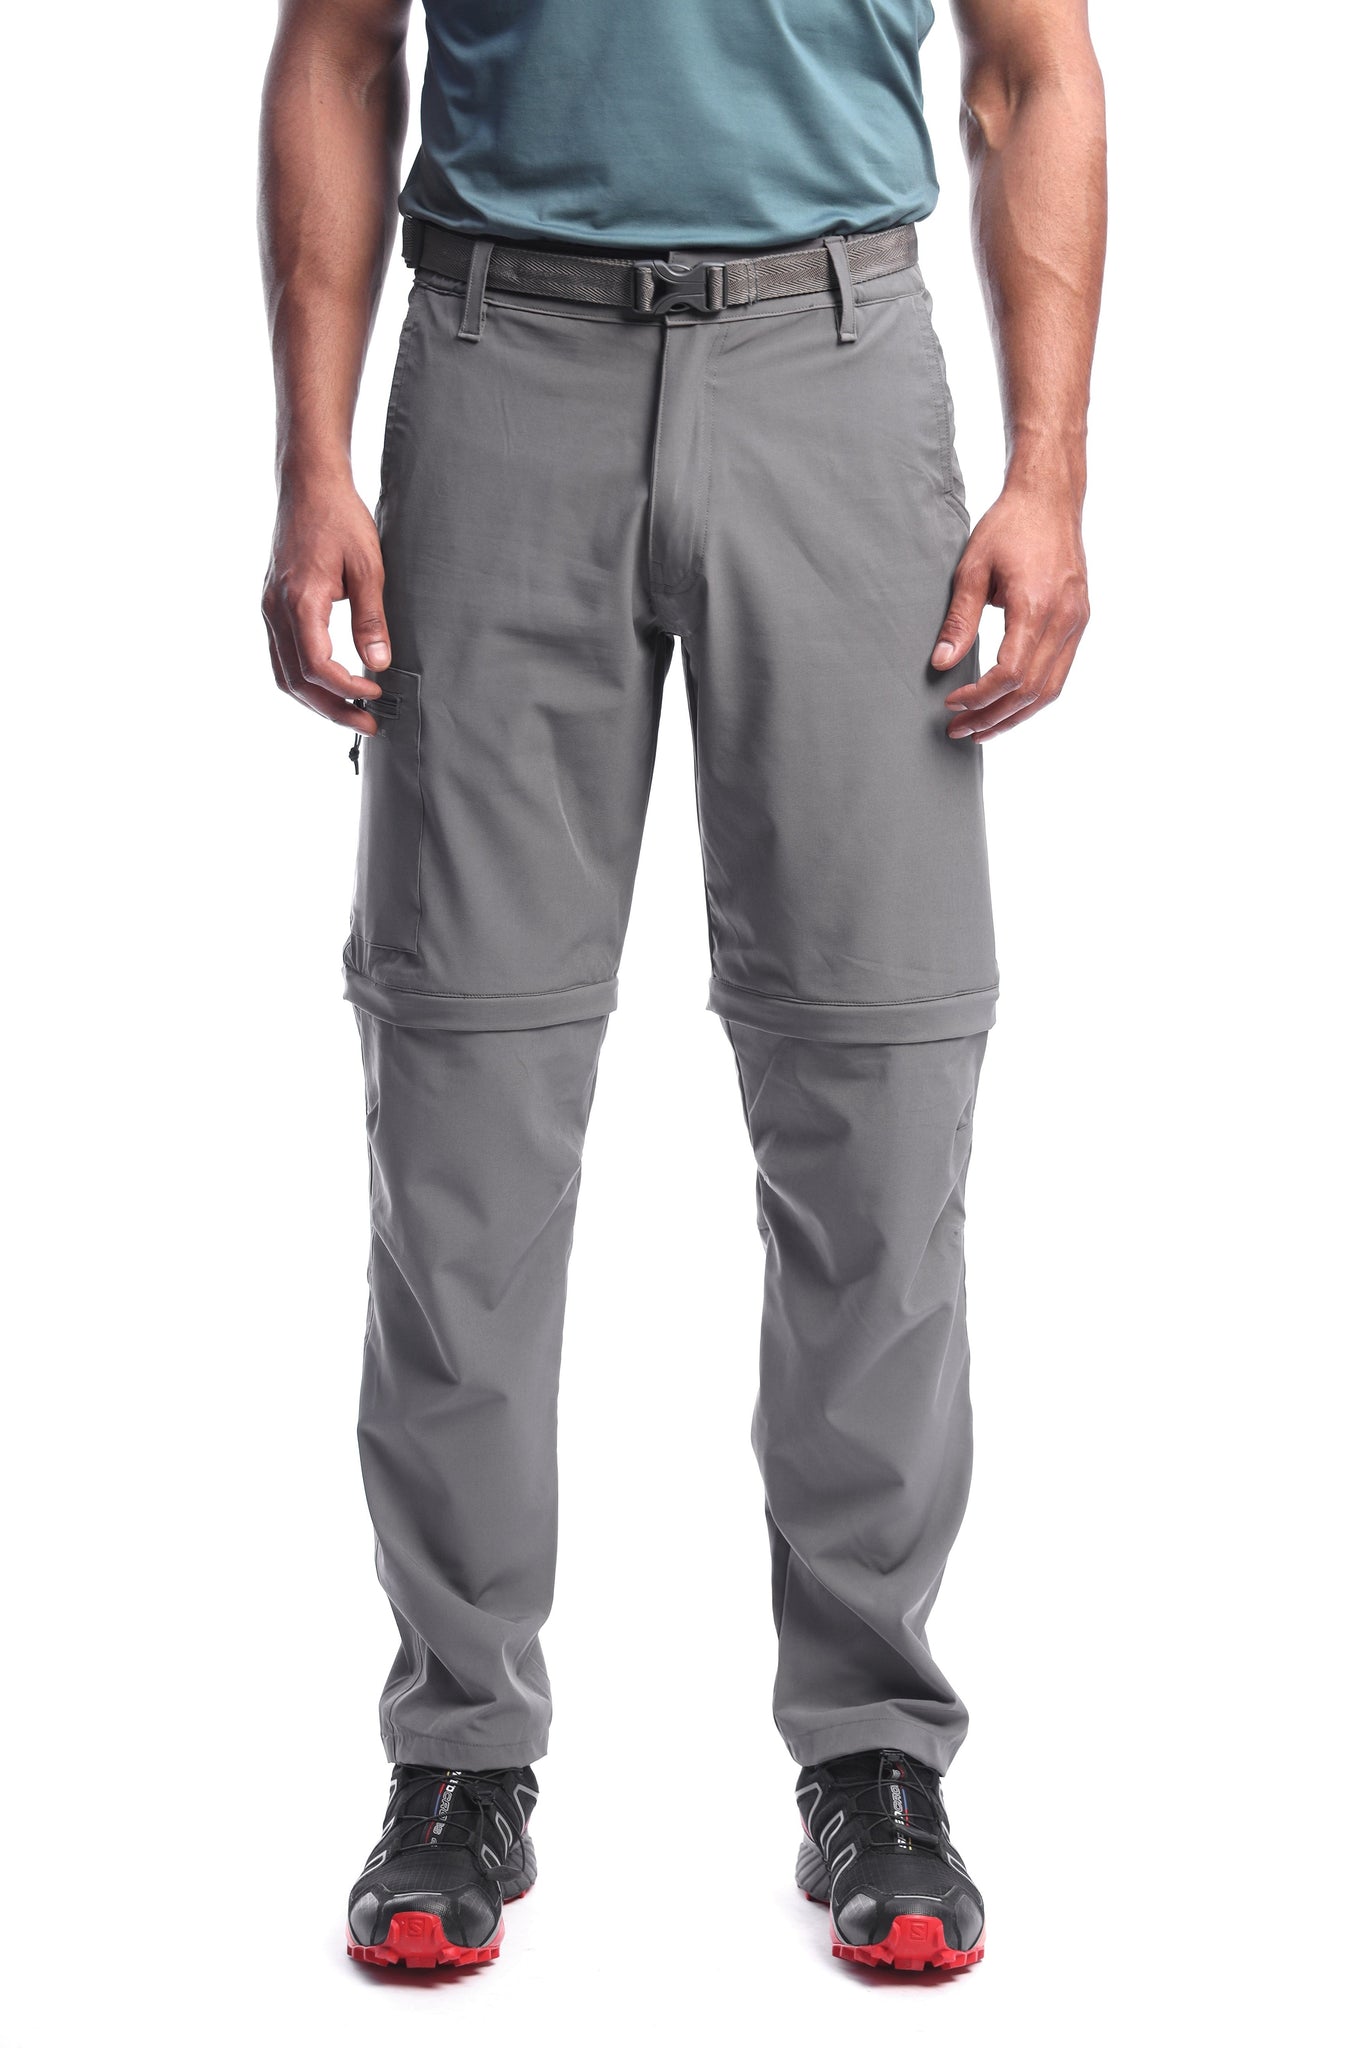 Men's Stretchable Pants for Hiking and Trekking with Detachable Lower –  Tripole Gears